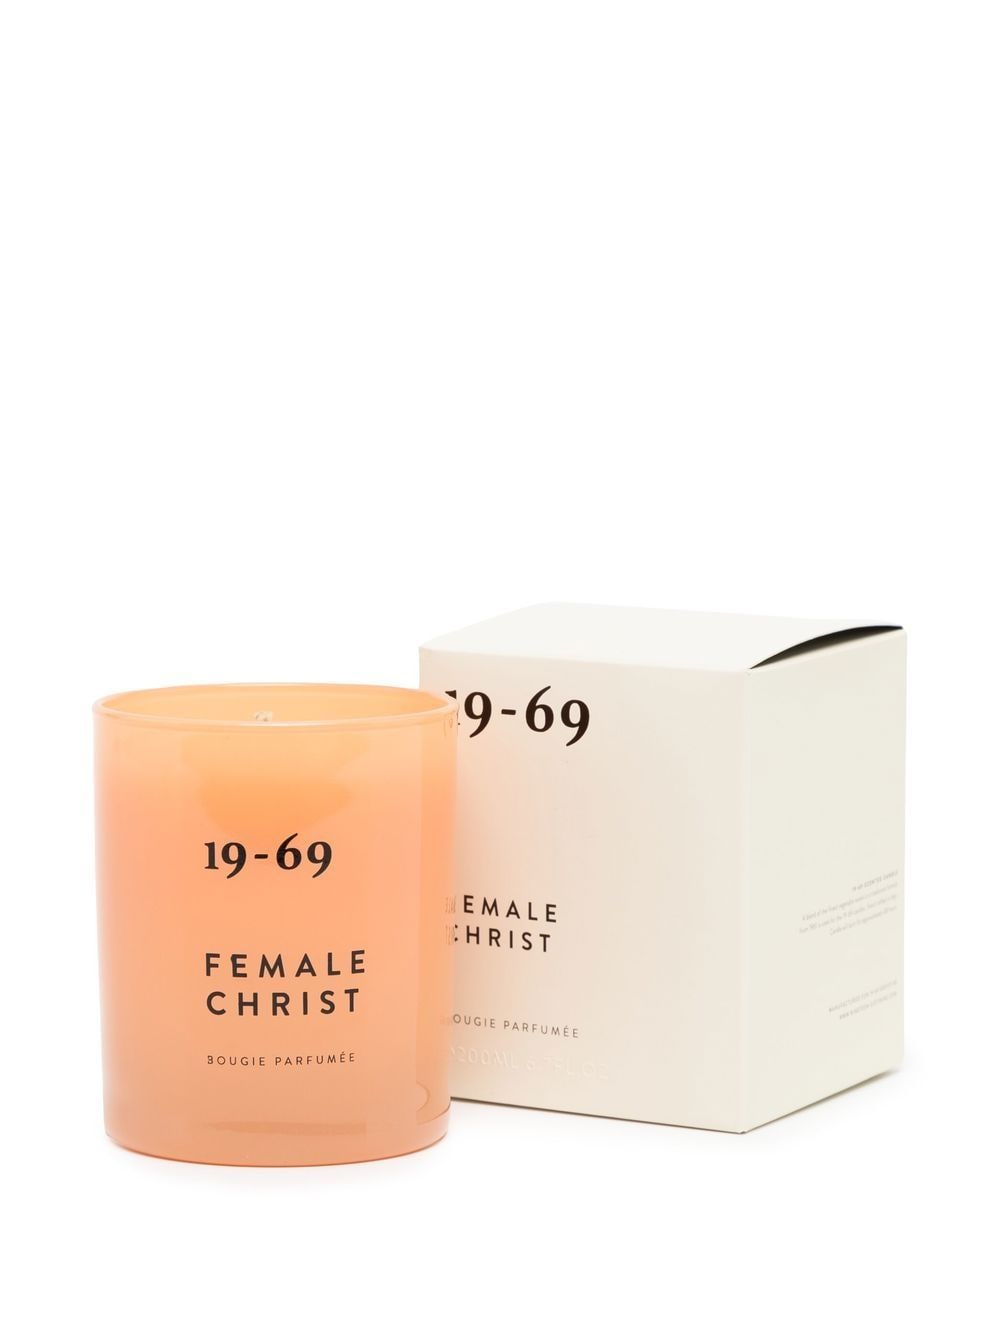 Shop 19-69 Female Christ Scented Candle (200g)